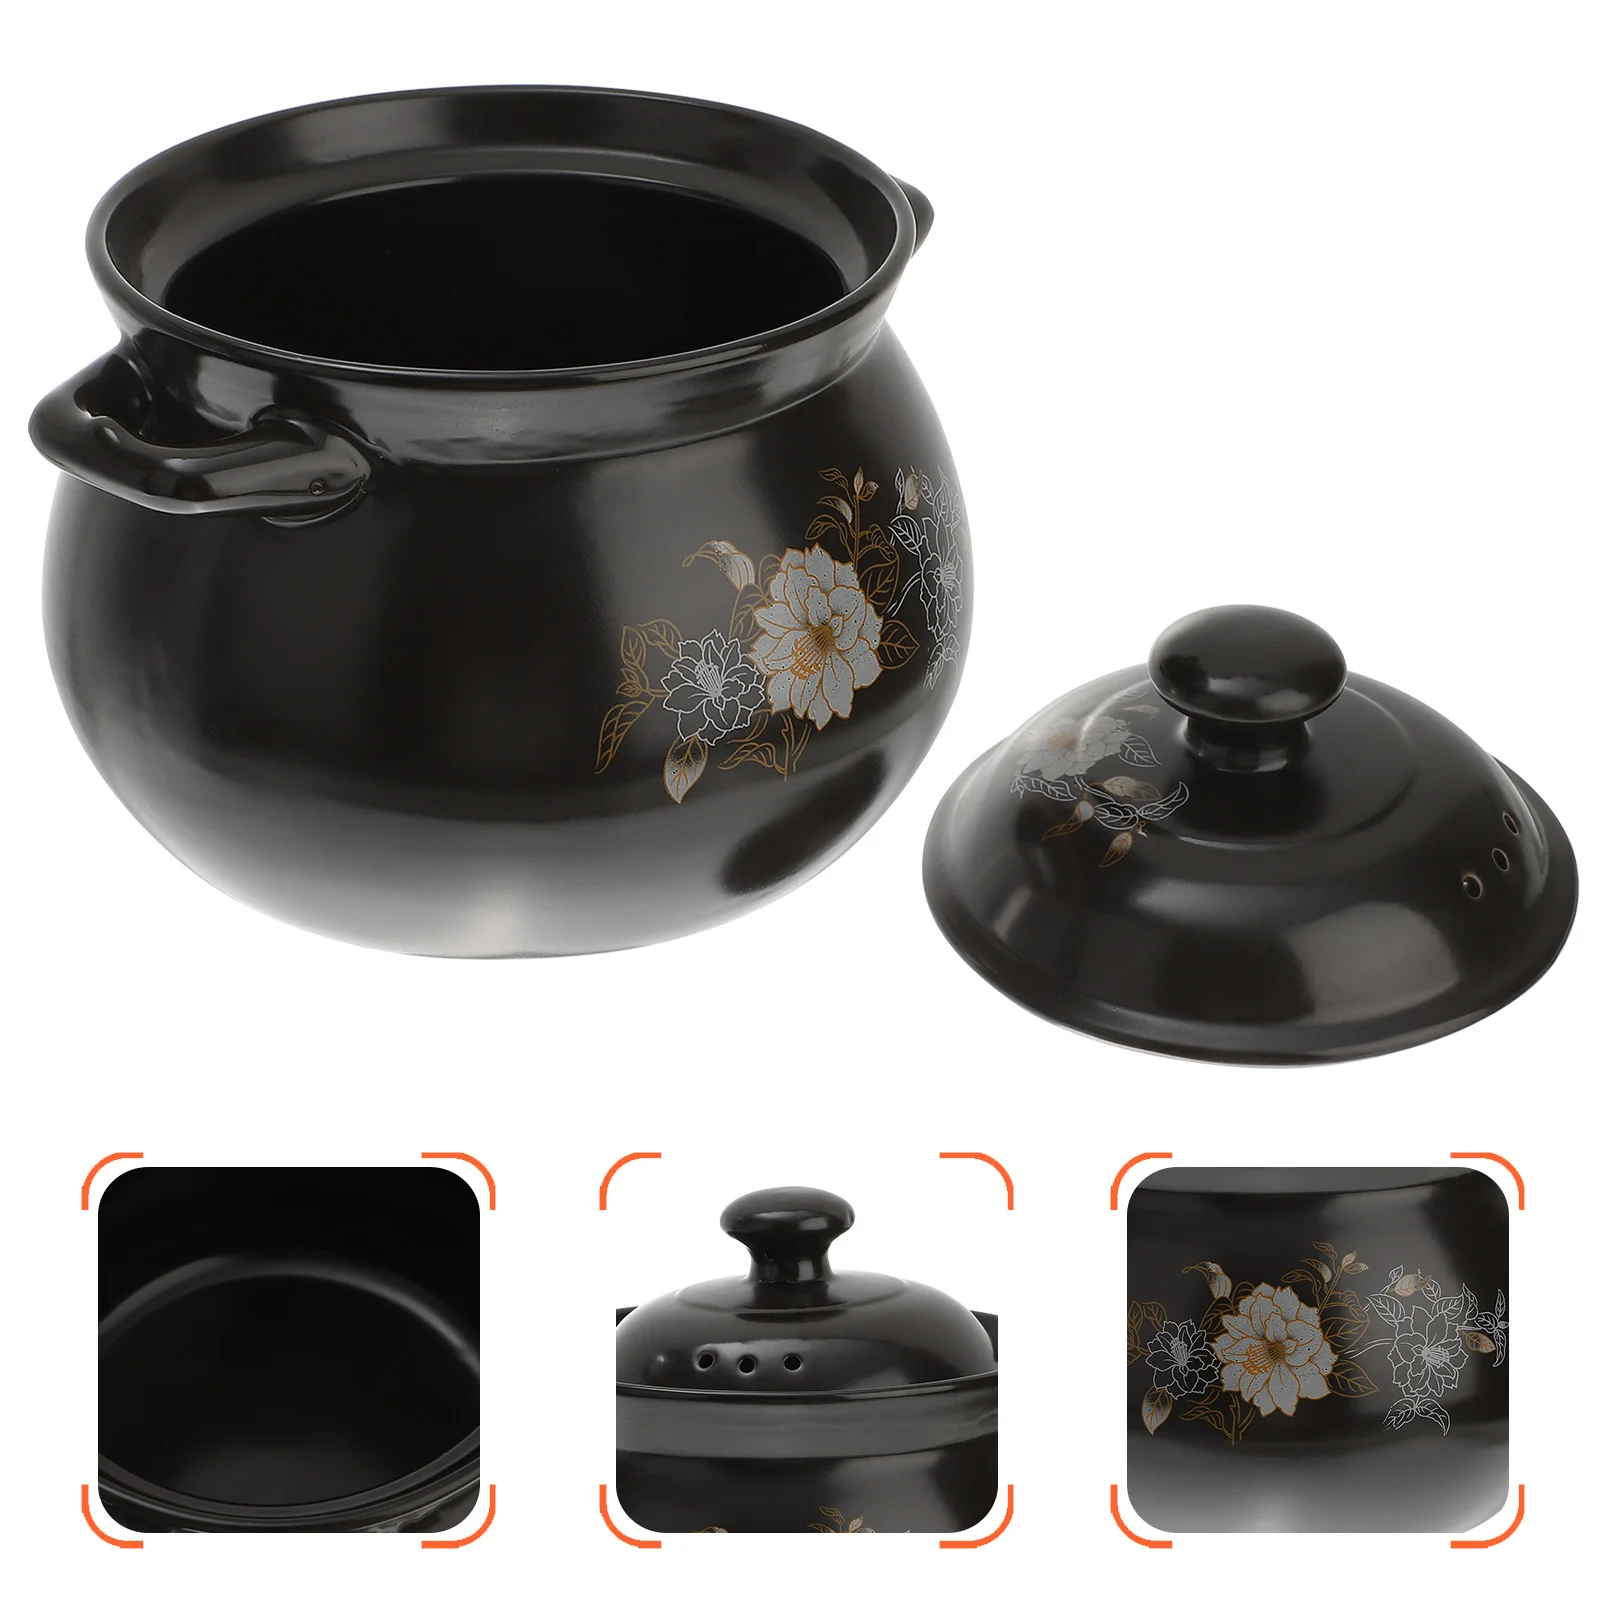 

Pot Ceramic Casserole Stew Soup Claylid Cooking Ramen Cookware Bowl Stockpot Earthenware Hot Korean Stockpan Covered Dish